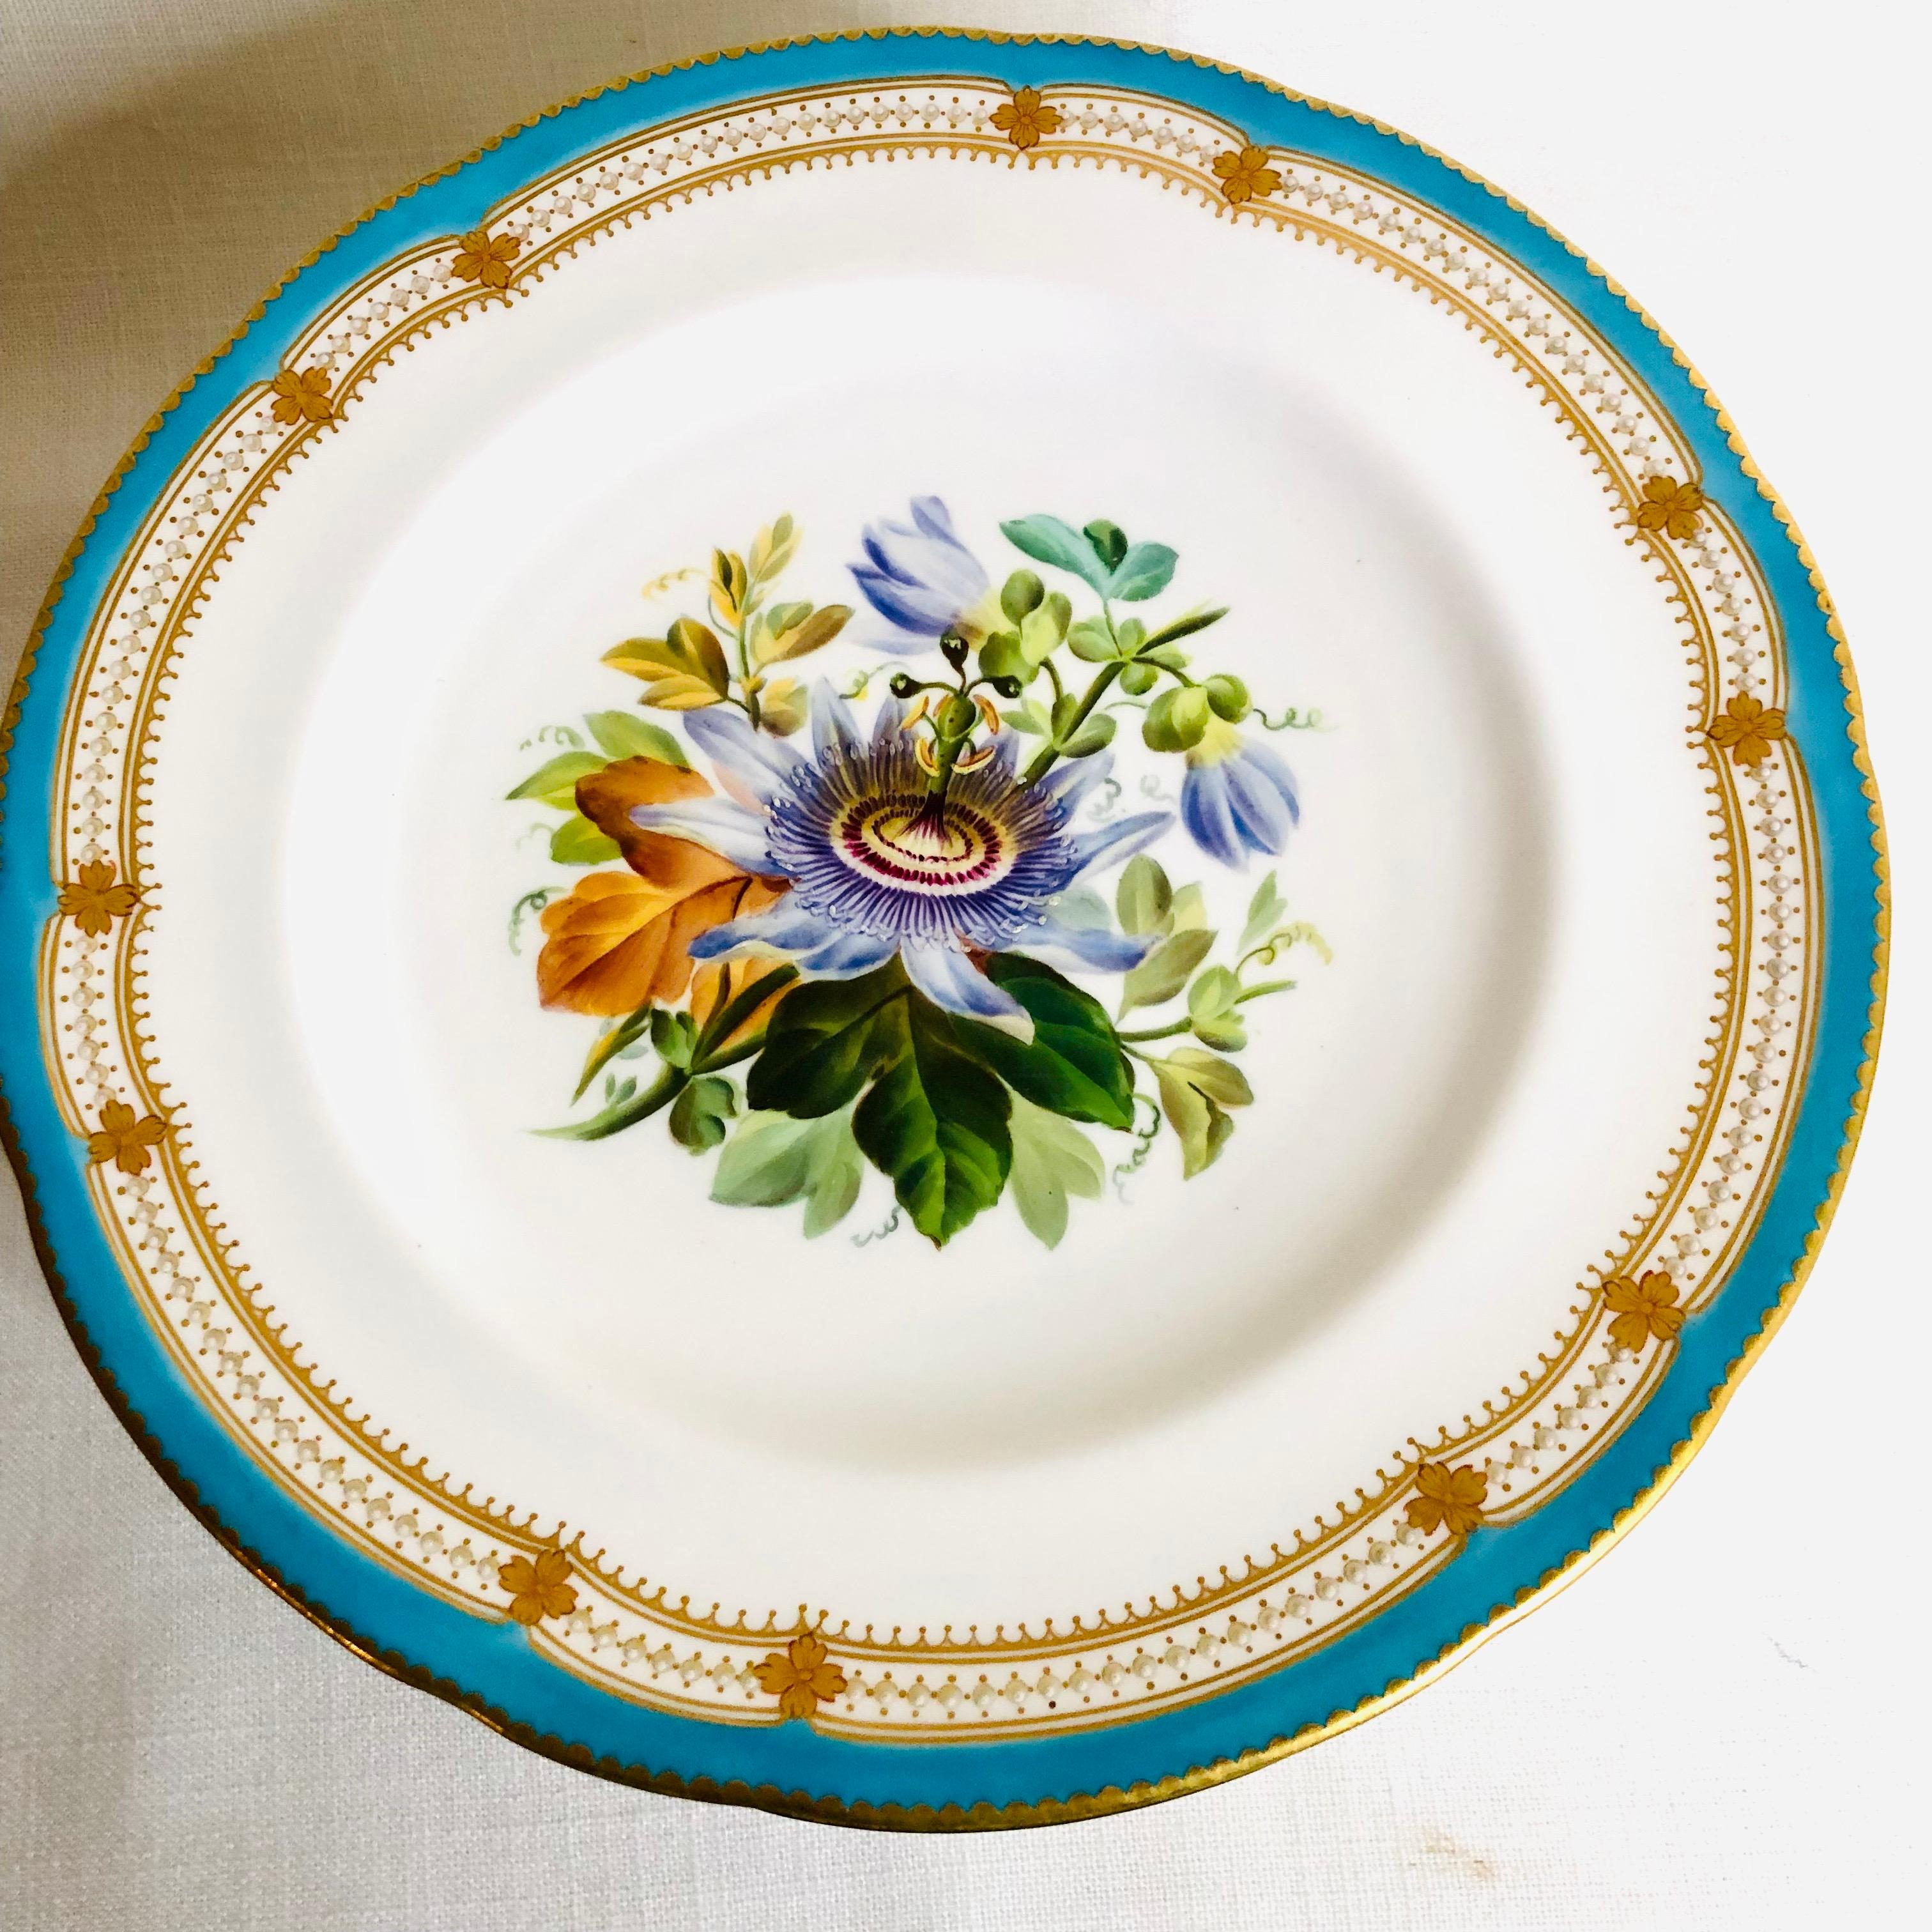 Set of 16 Rare Minton Plates Each Hand-Painted with a Different Flower Bouquet 3